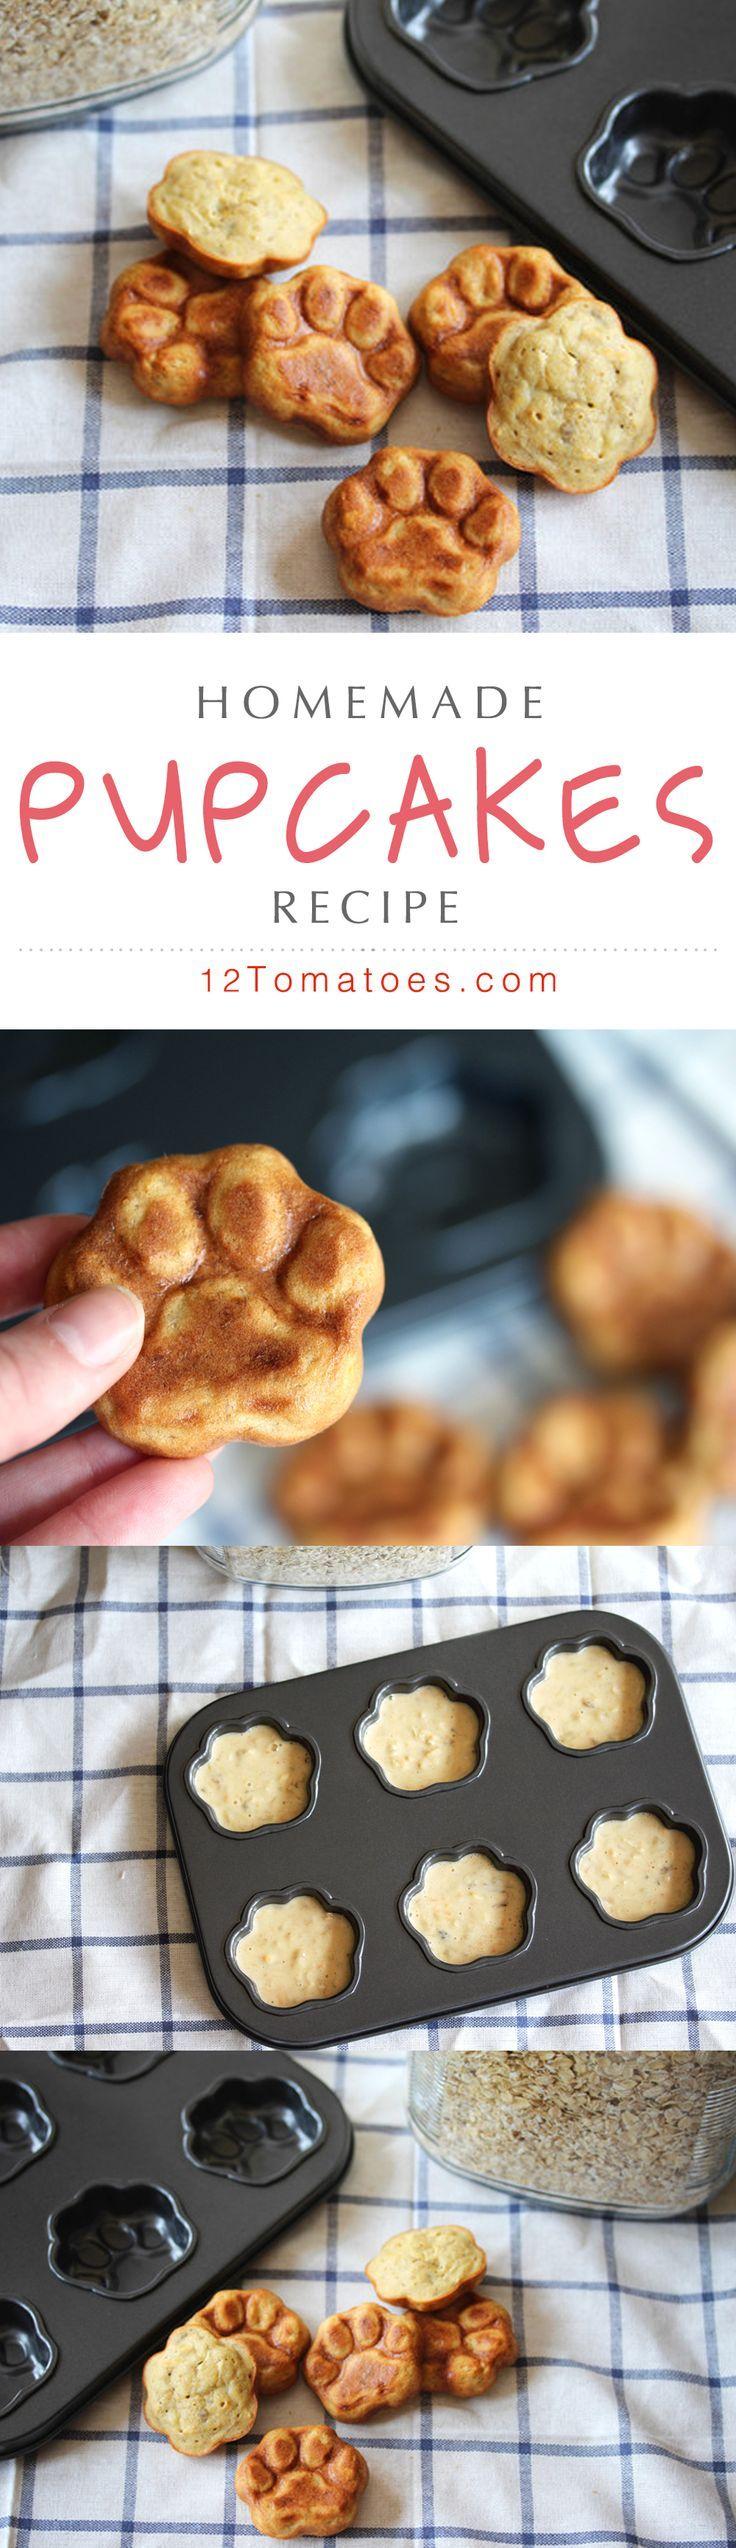 Hochzeit - Give Your Pups Some Lovin’ With These Tasty Homemade Pupcakes!